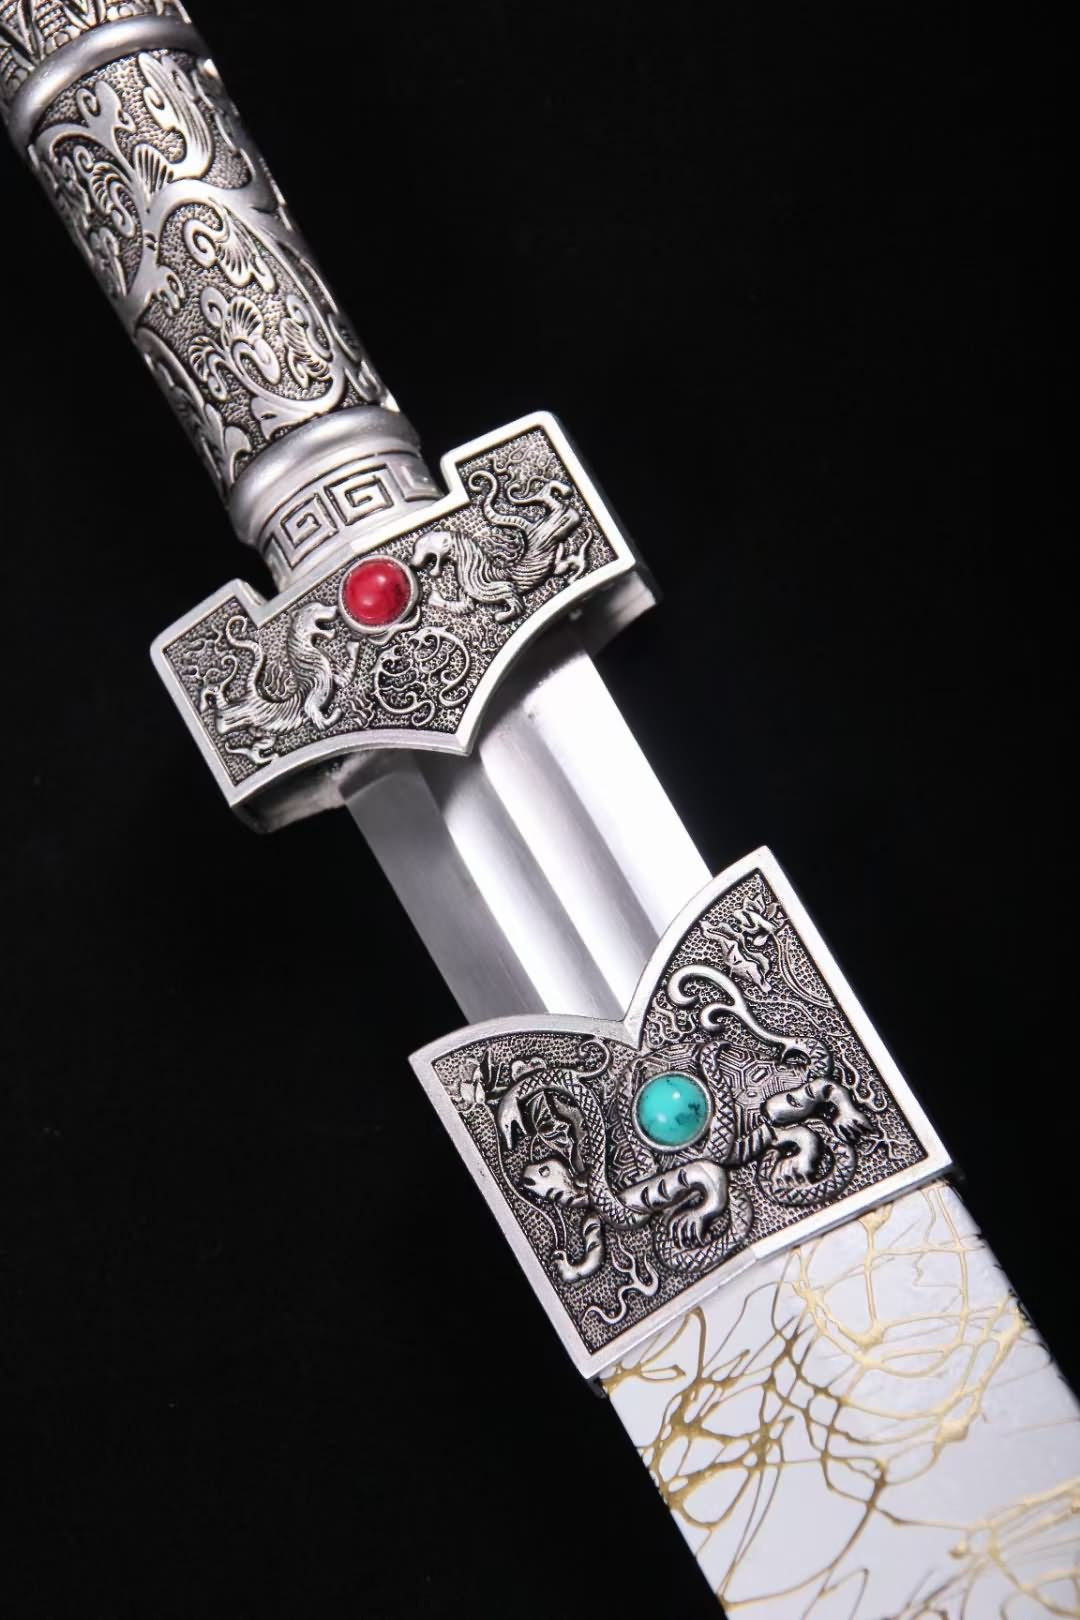 Han jian swords Forged high Carbon Steel Blade,Alloy Fittings,White Scabbard,LOONGSWORD